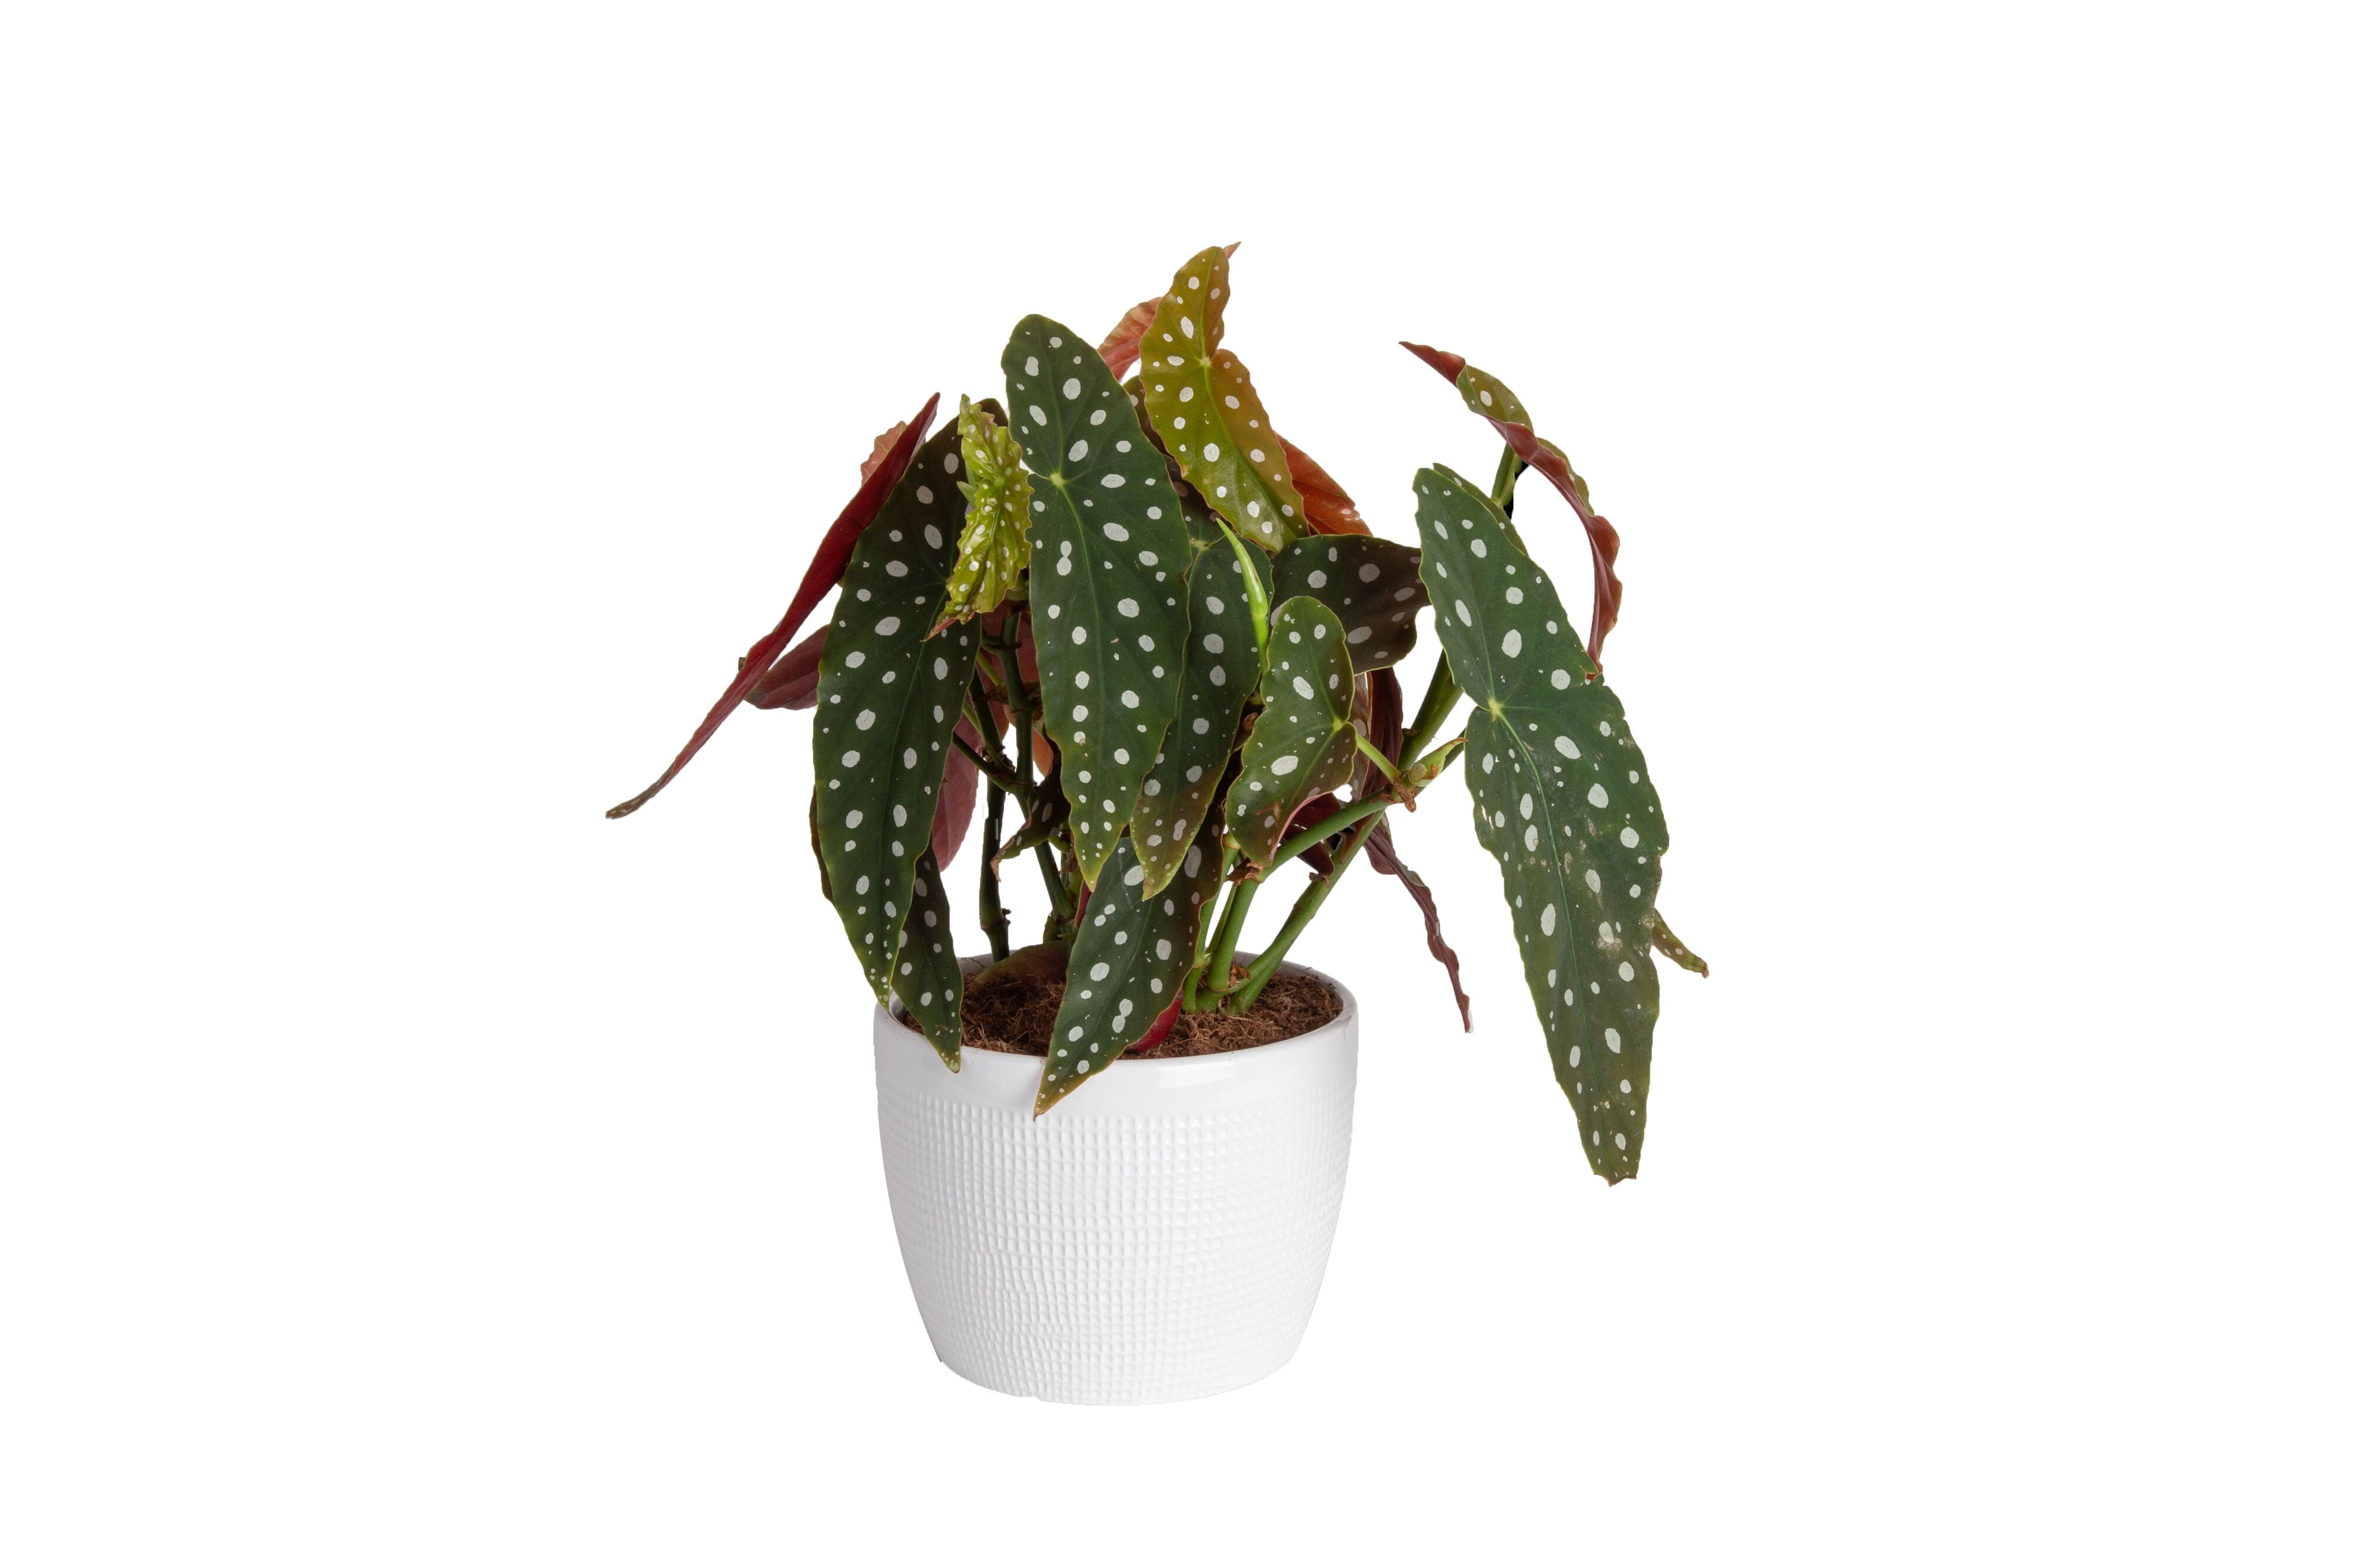 Trending Tropicals Live 15in. Tall Polka Dot Begonia Plant 6in Ceramic